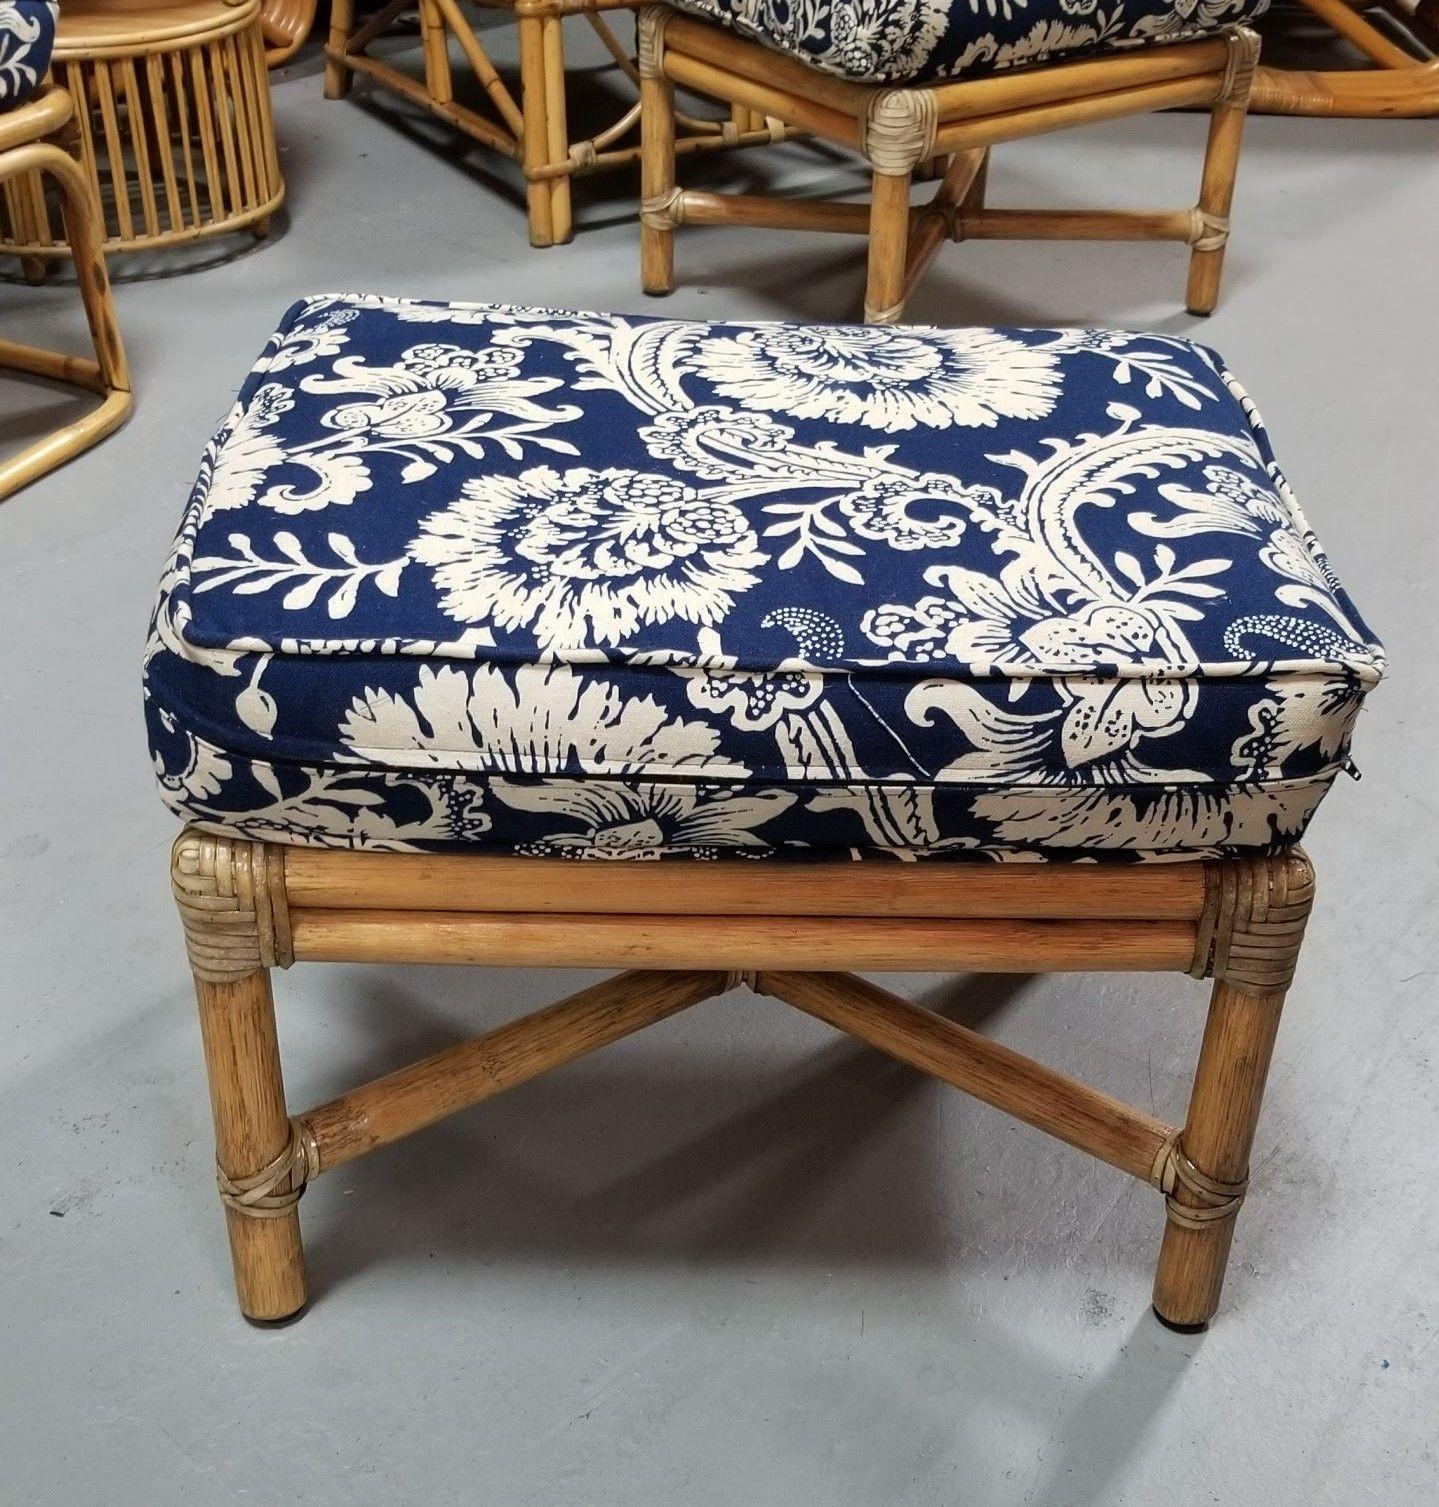 Set of two restored rattan footstools featuring an 